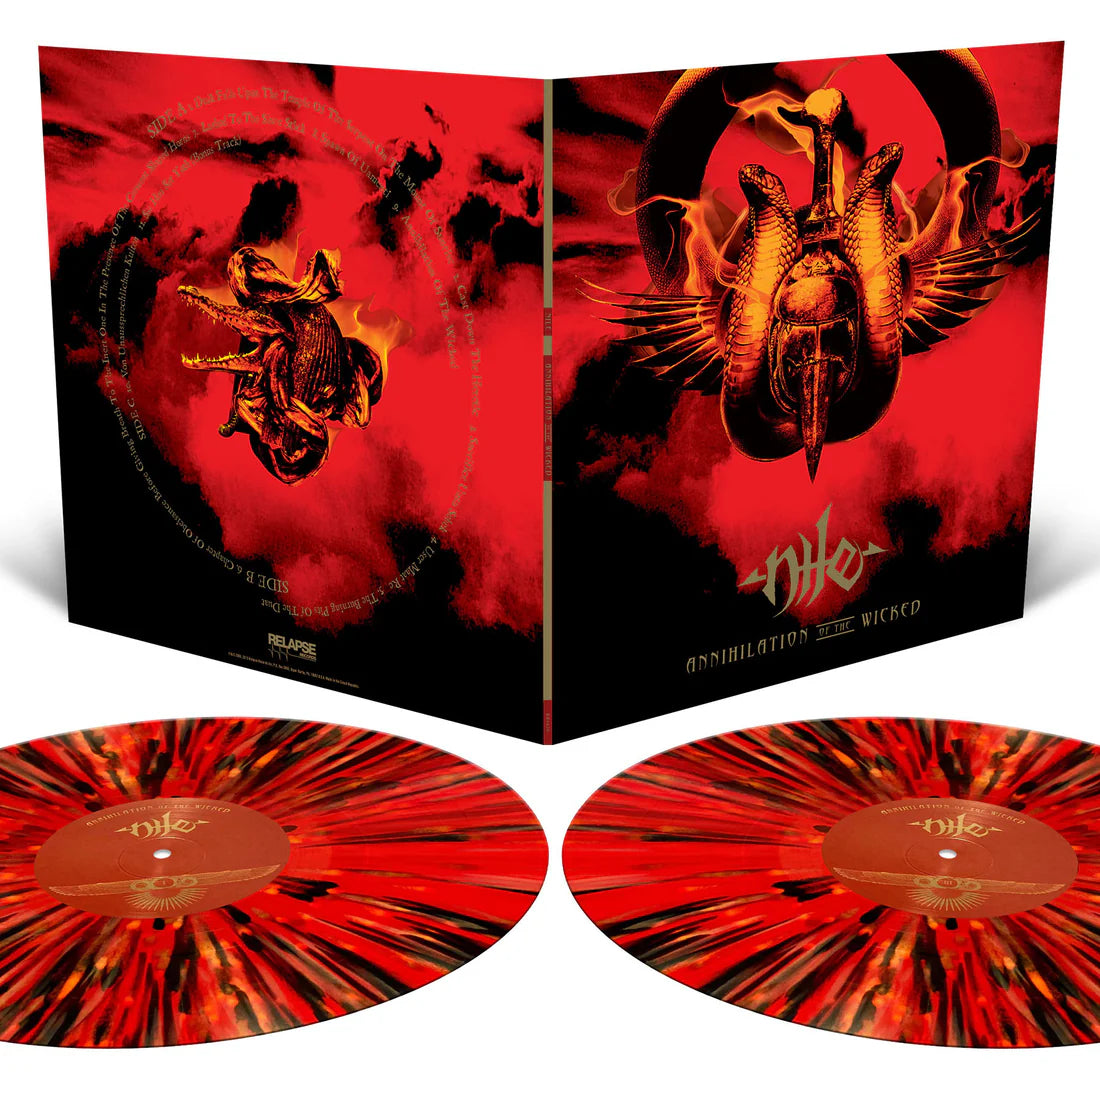 Nile - Annihilation of the Wicked double LP